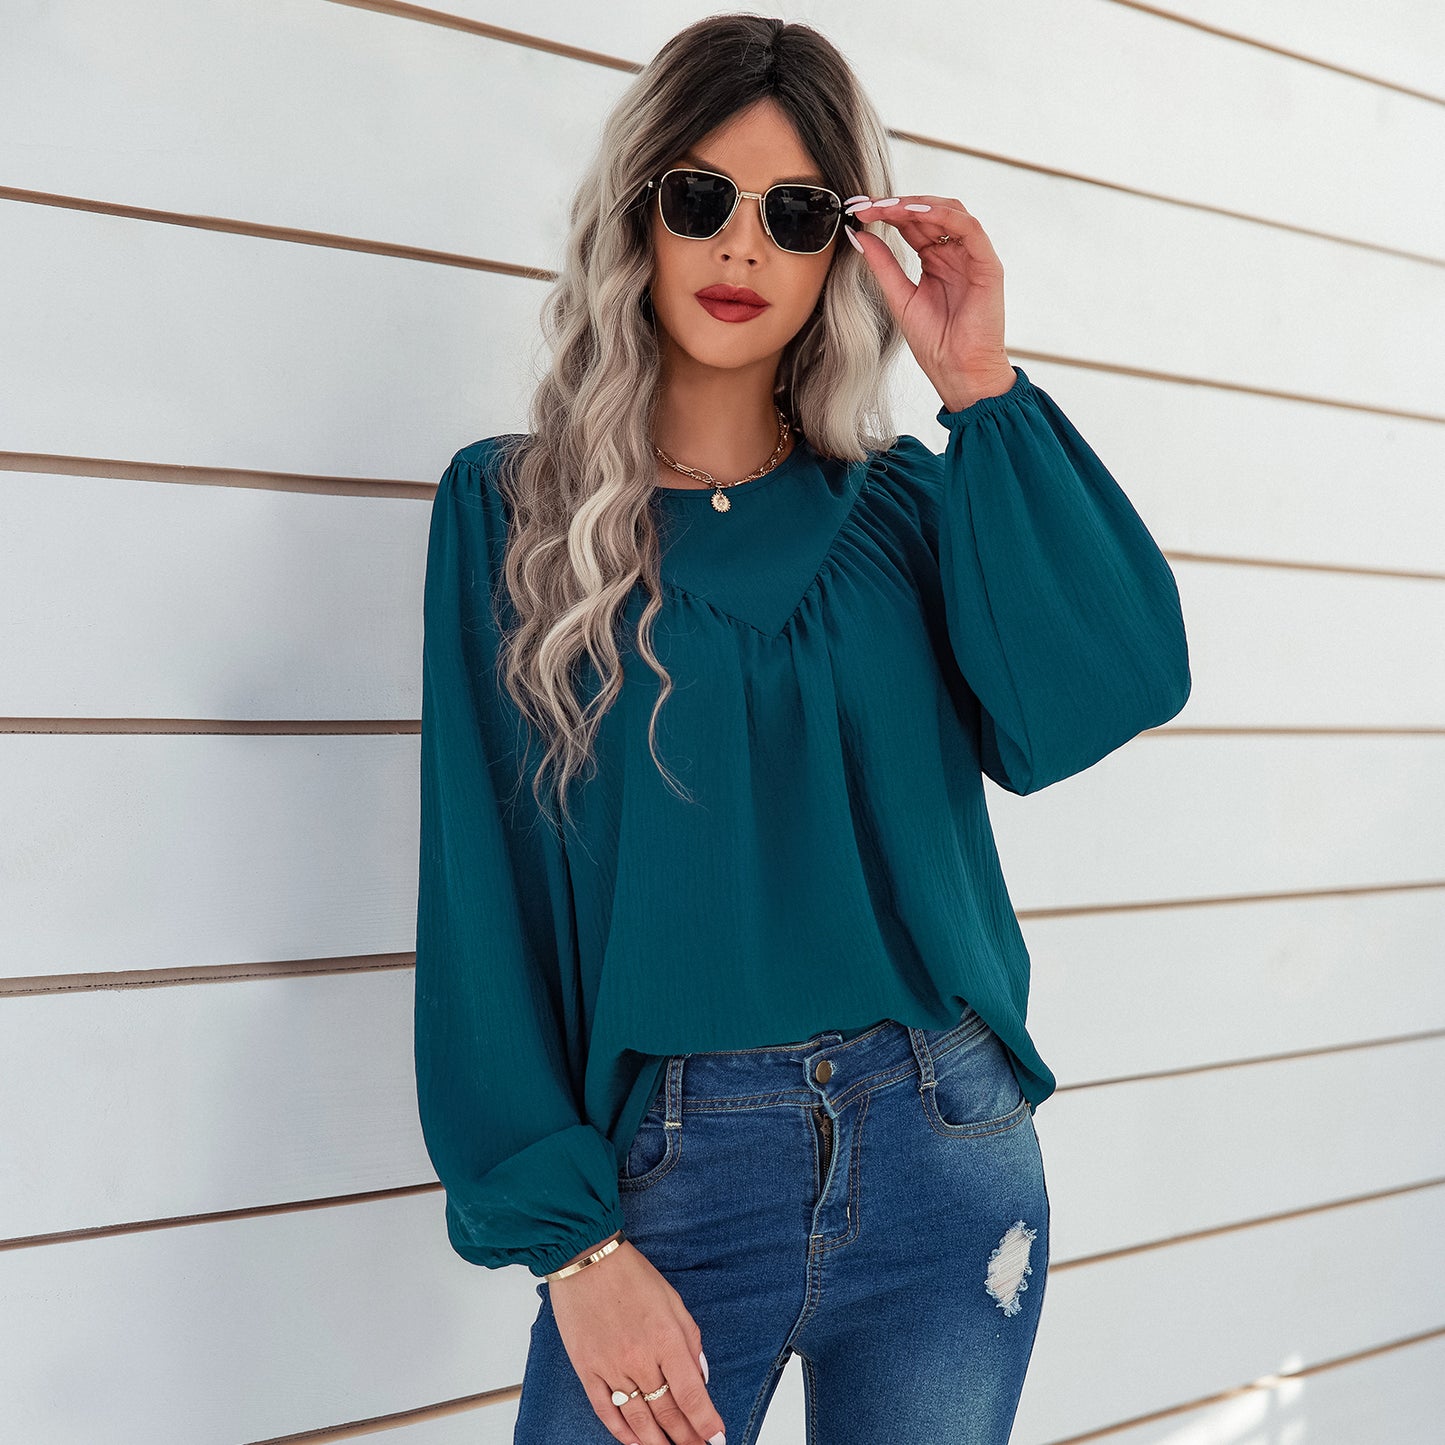 YESFASHION Women Clothing Solid Color Round Neck Pullover Shirt Tops